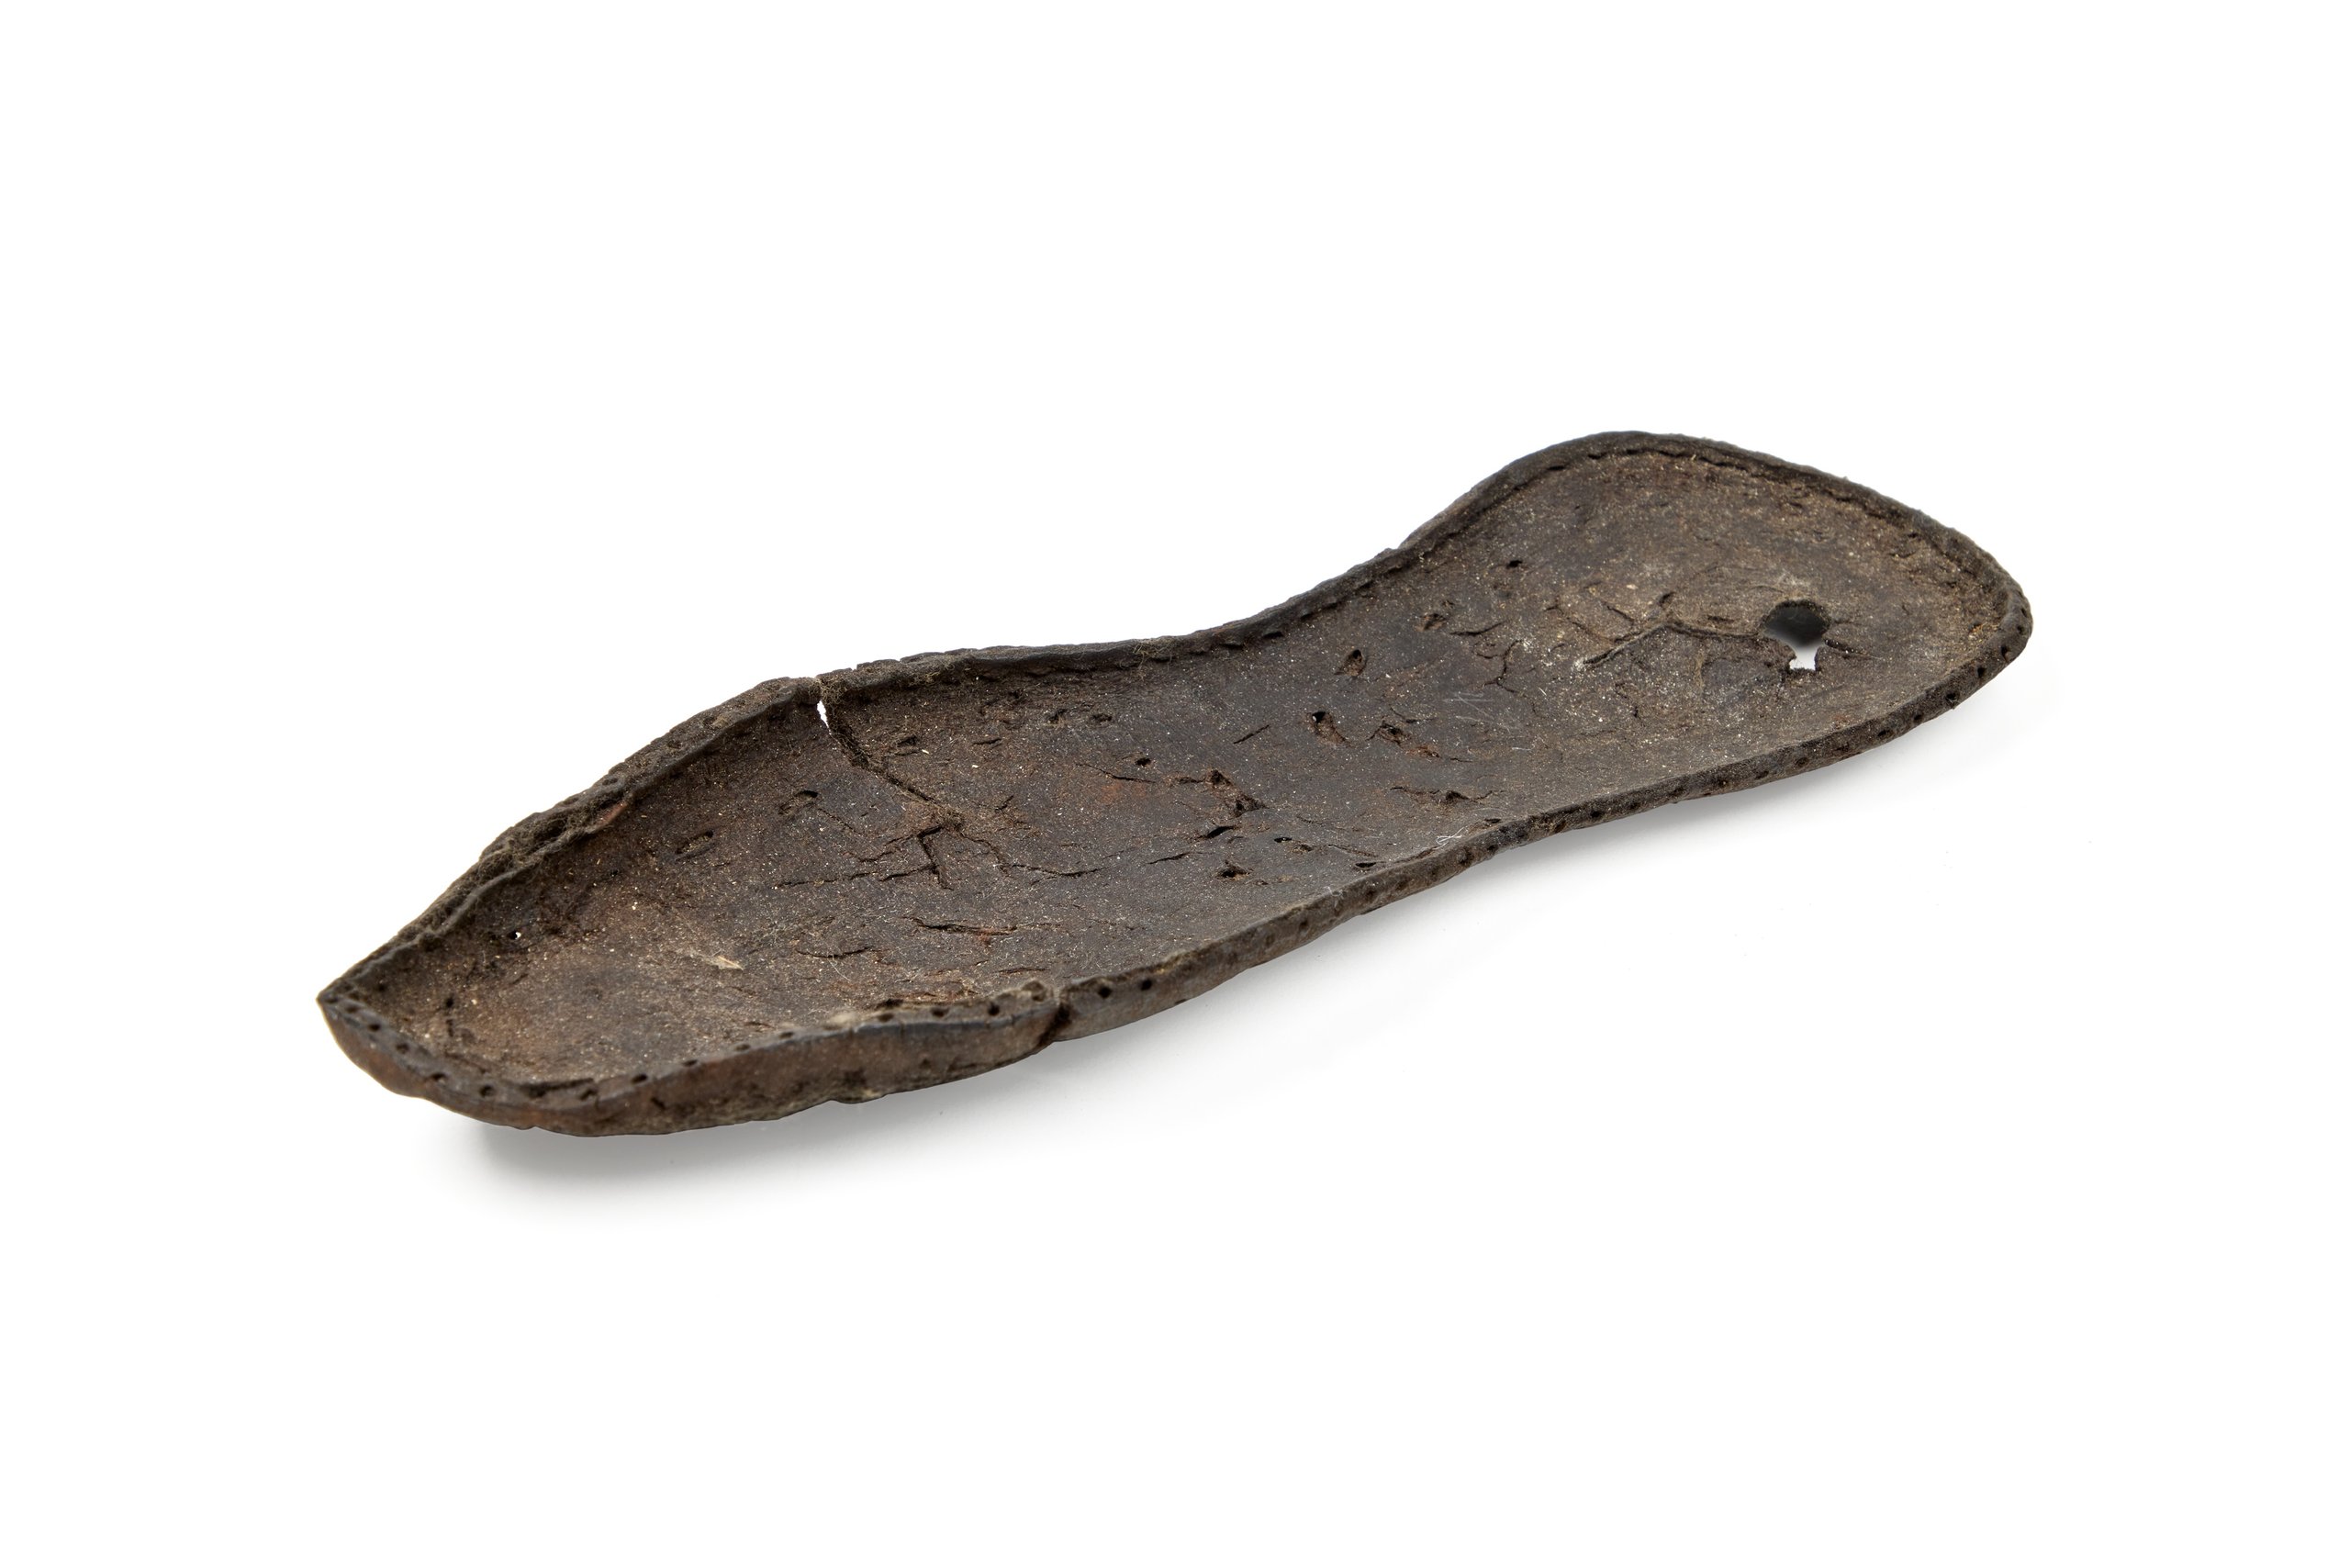 Shoe sole from the Joseph Box collection